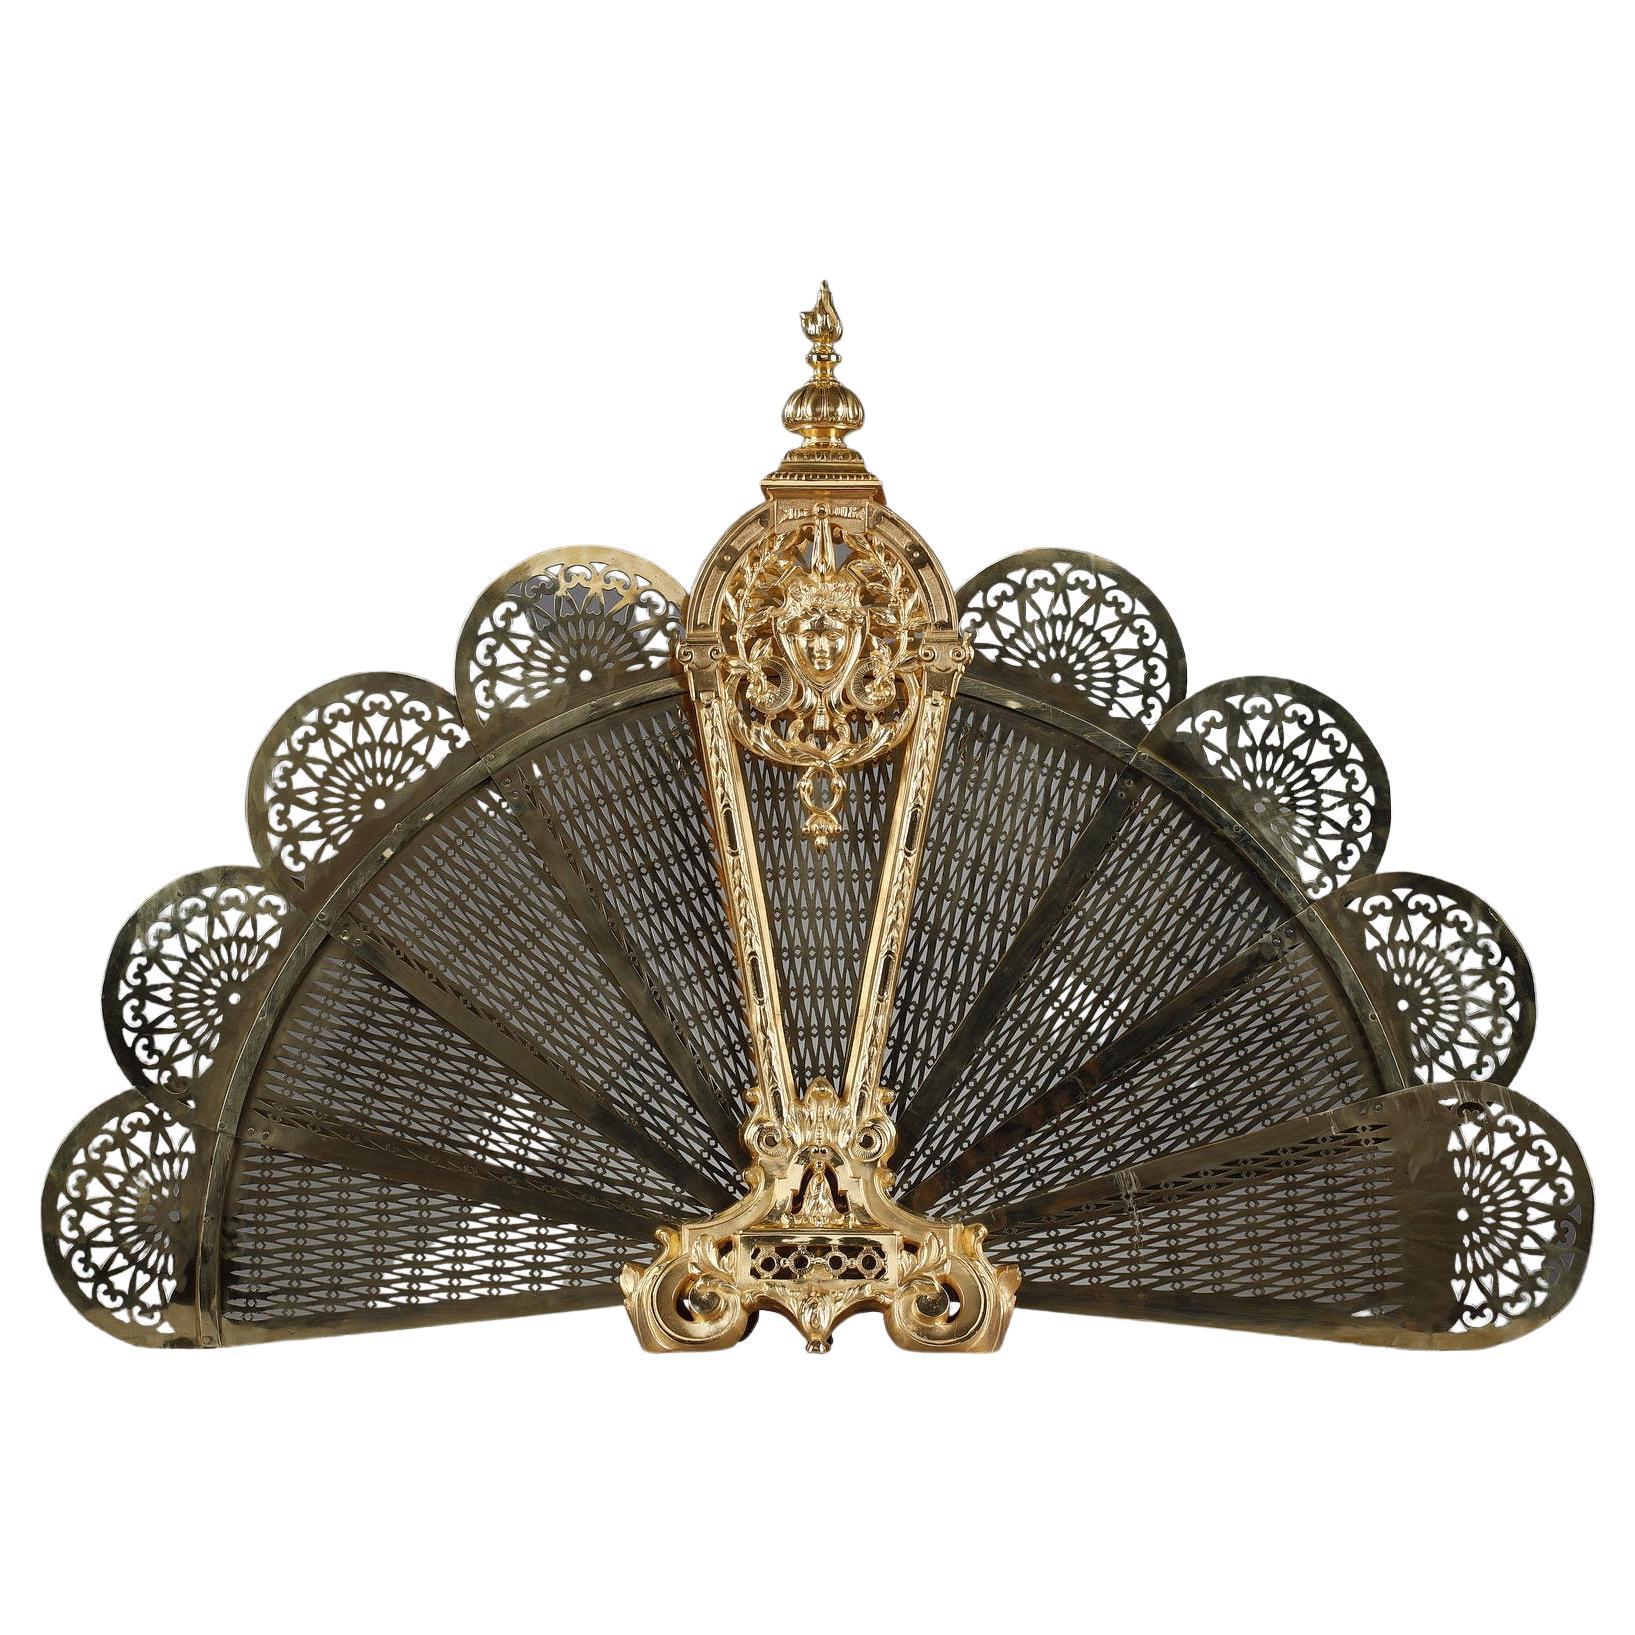 Gilt bronze and chased fan-shaped fire screen with female face decoration